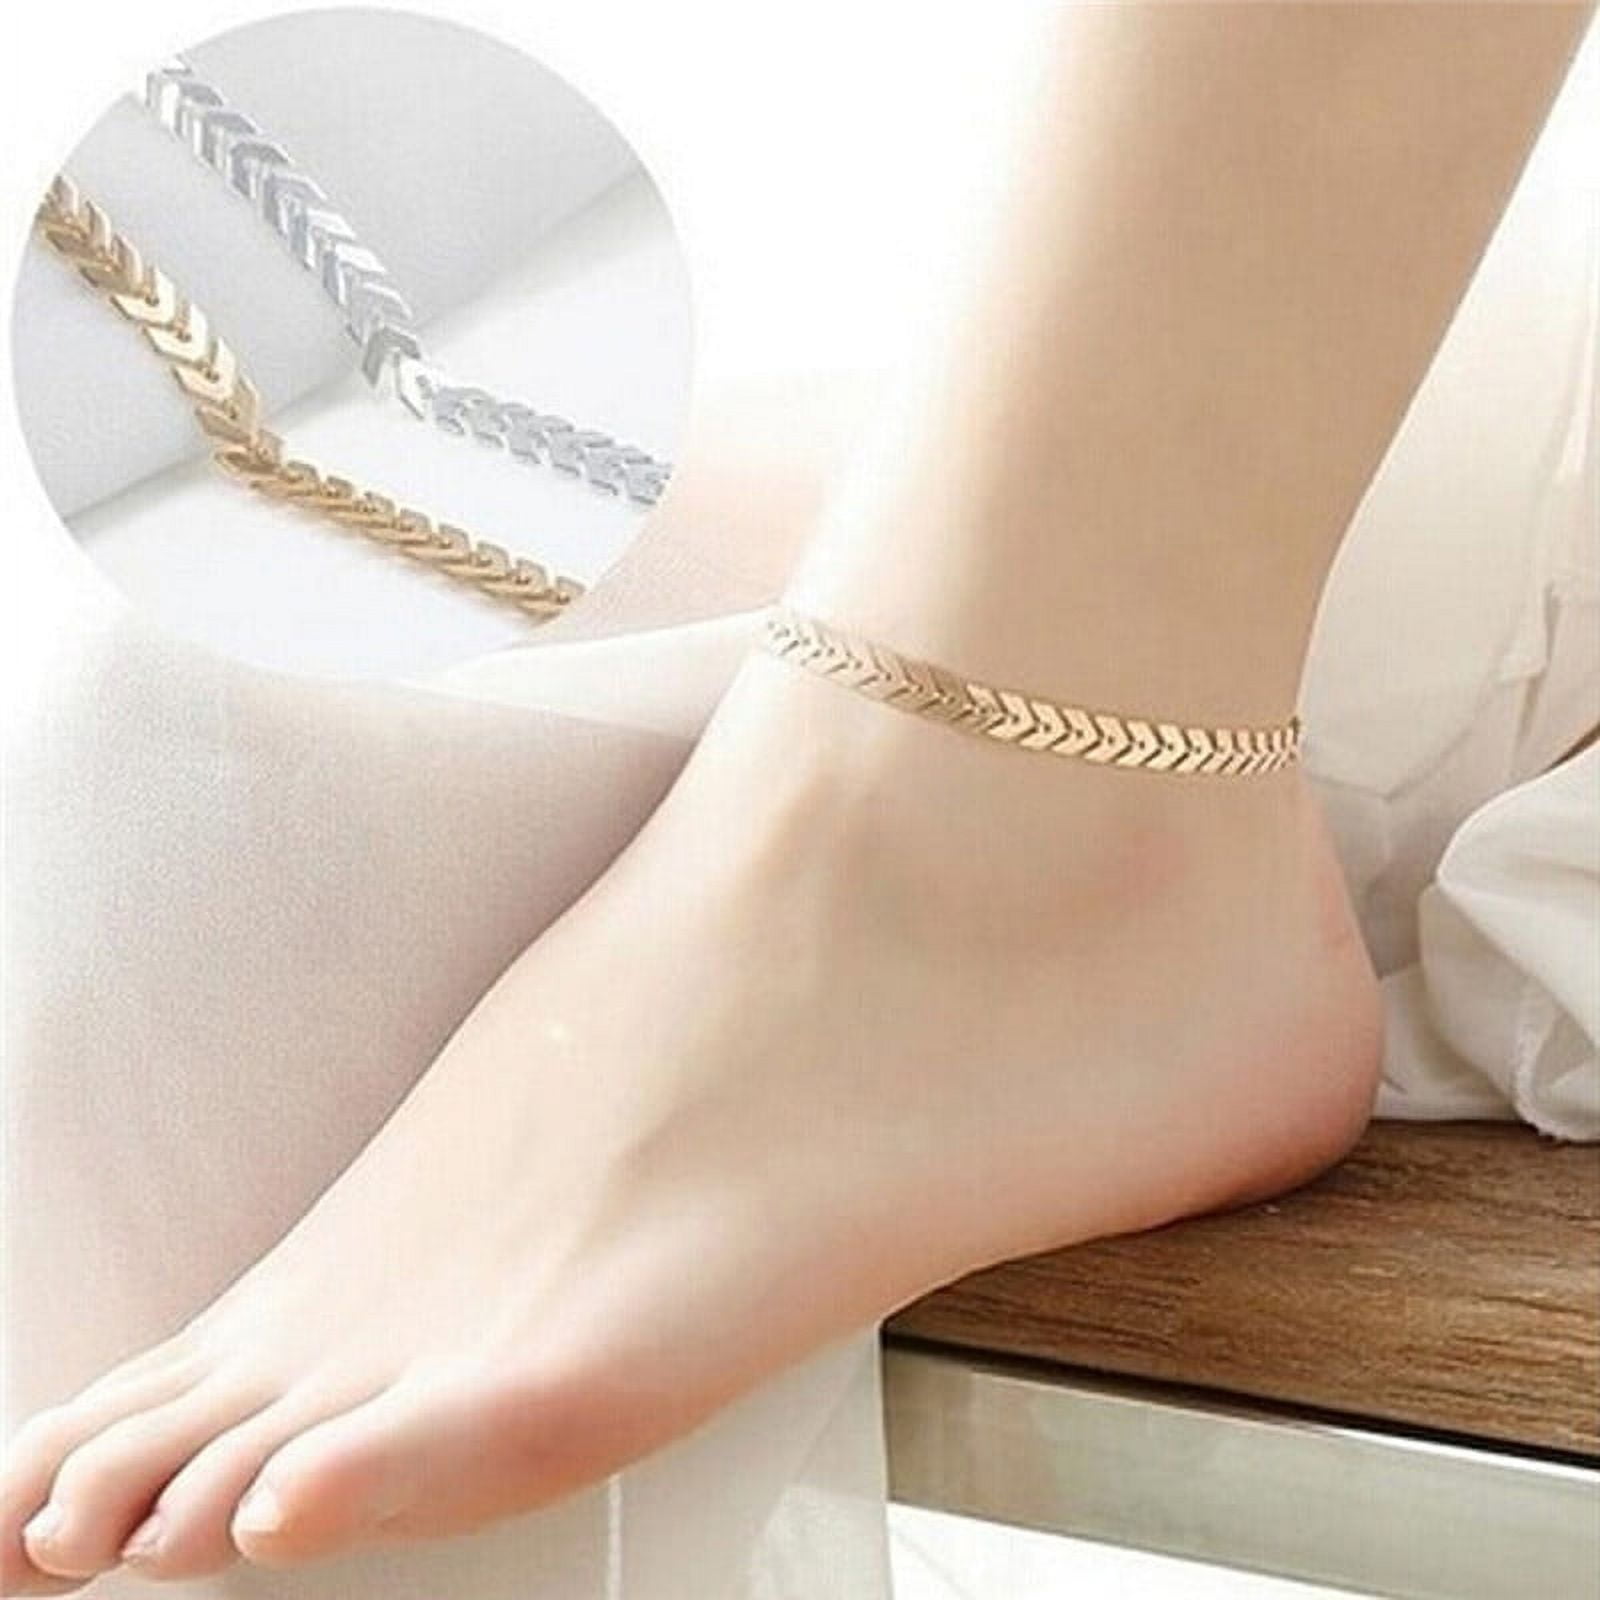 Yaomiao-24-Pieces-Ankle-Bracelet-Ankle-Chains-Beach-Foot-Bra